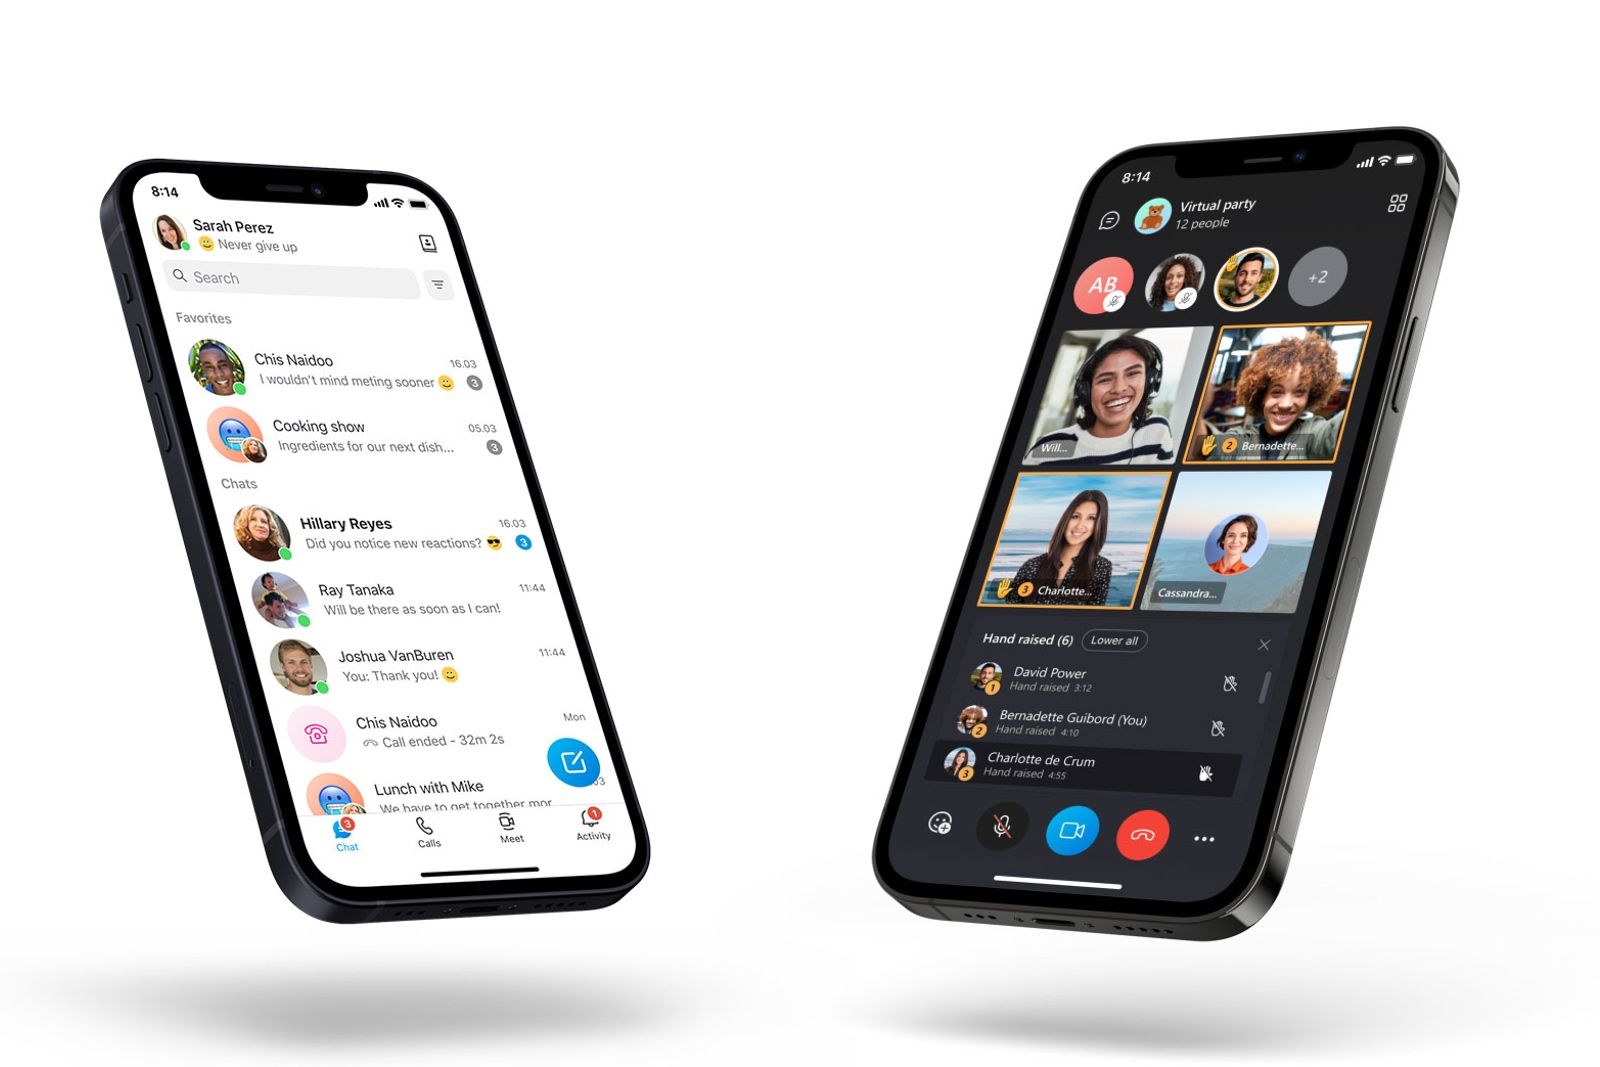 Skype redesign brings colourful new interface and performance boosts photo 2